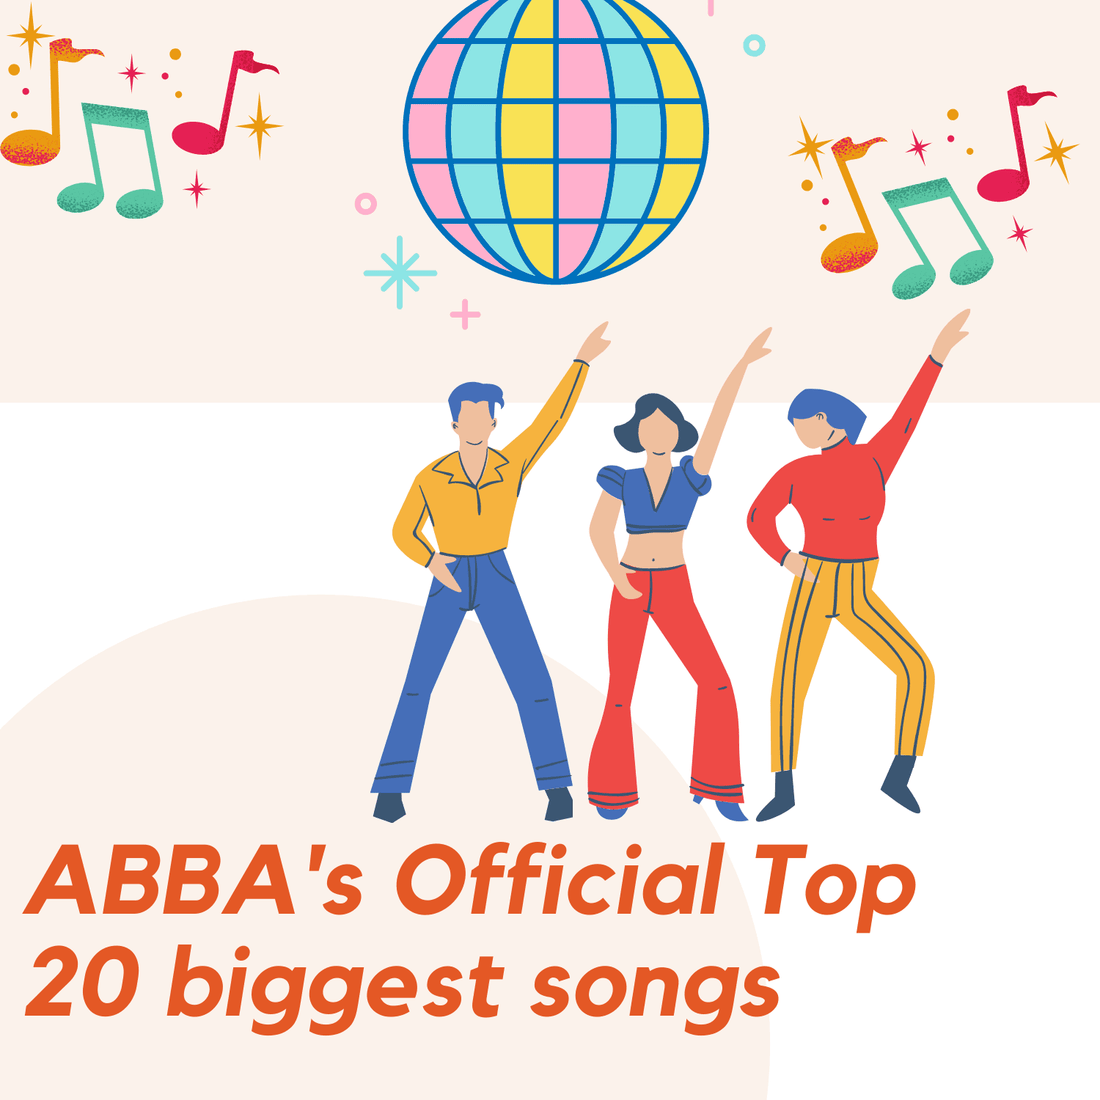 ABBA's Official Top 20 biggest songs - 98types